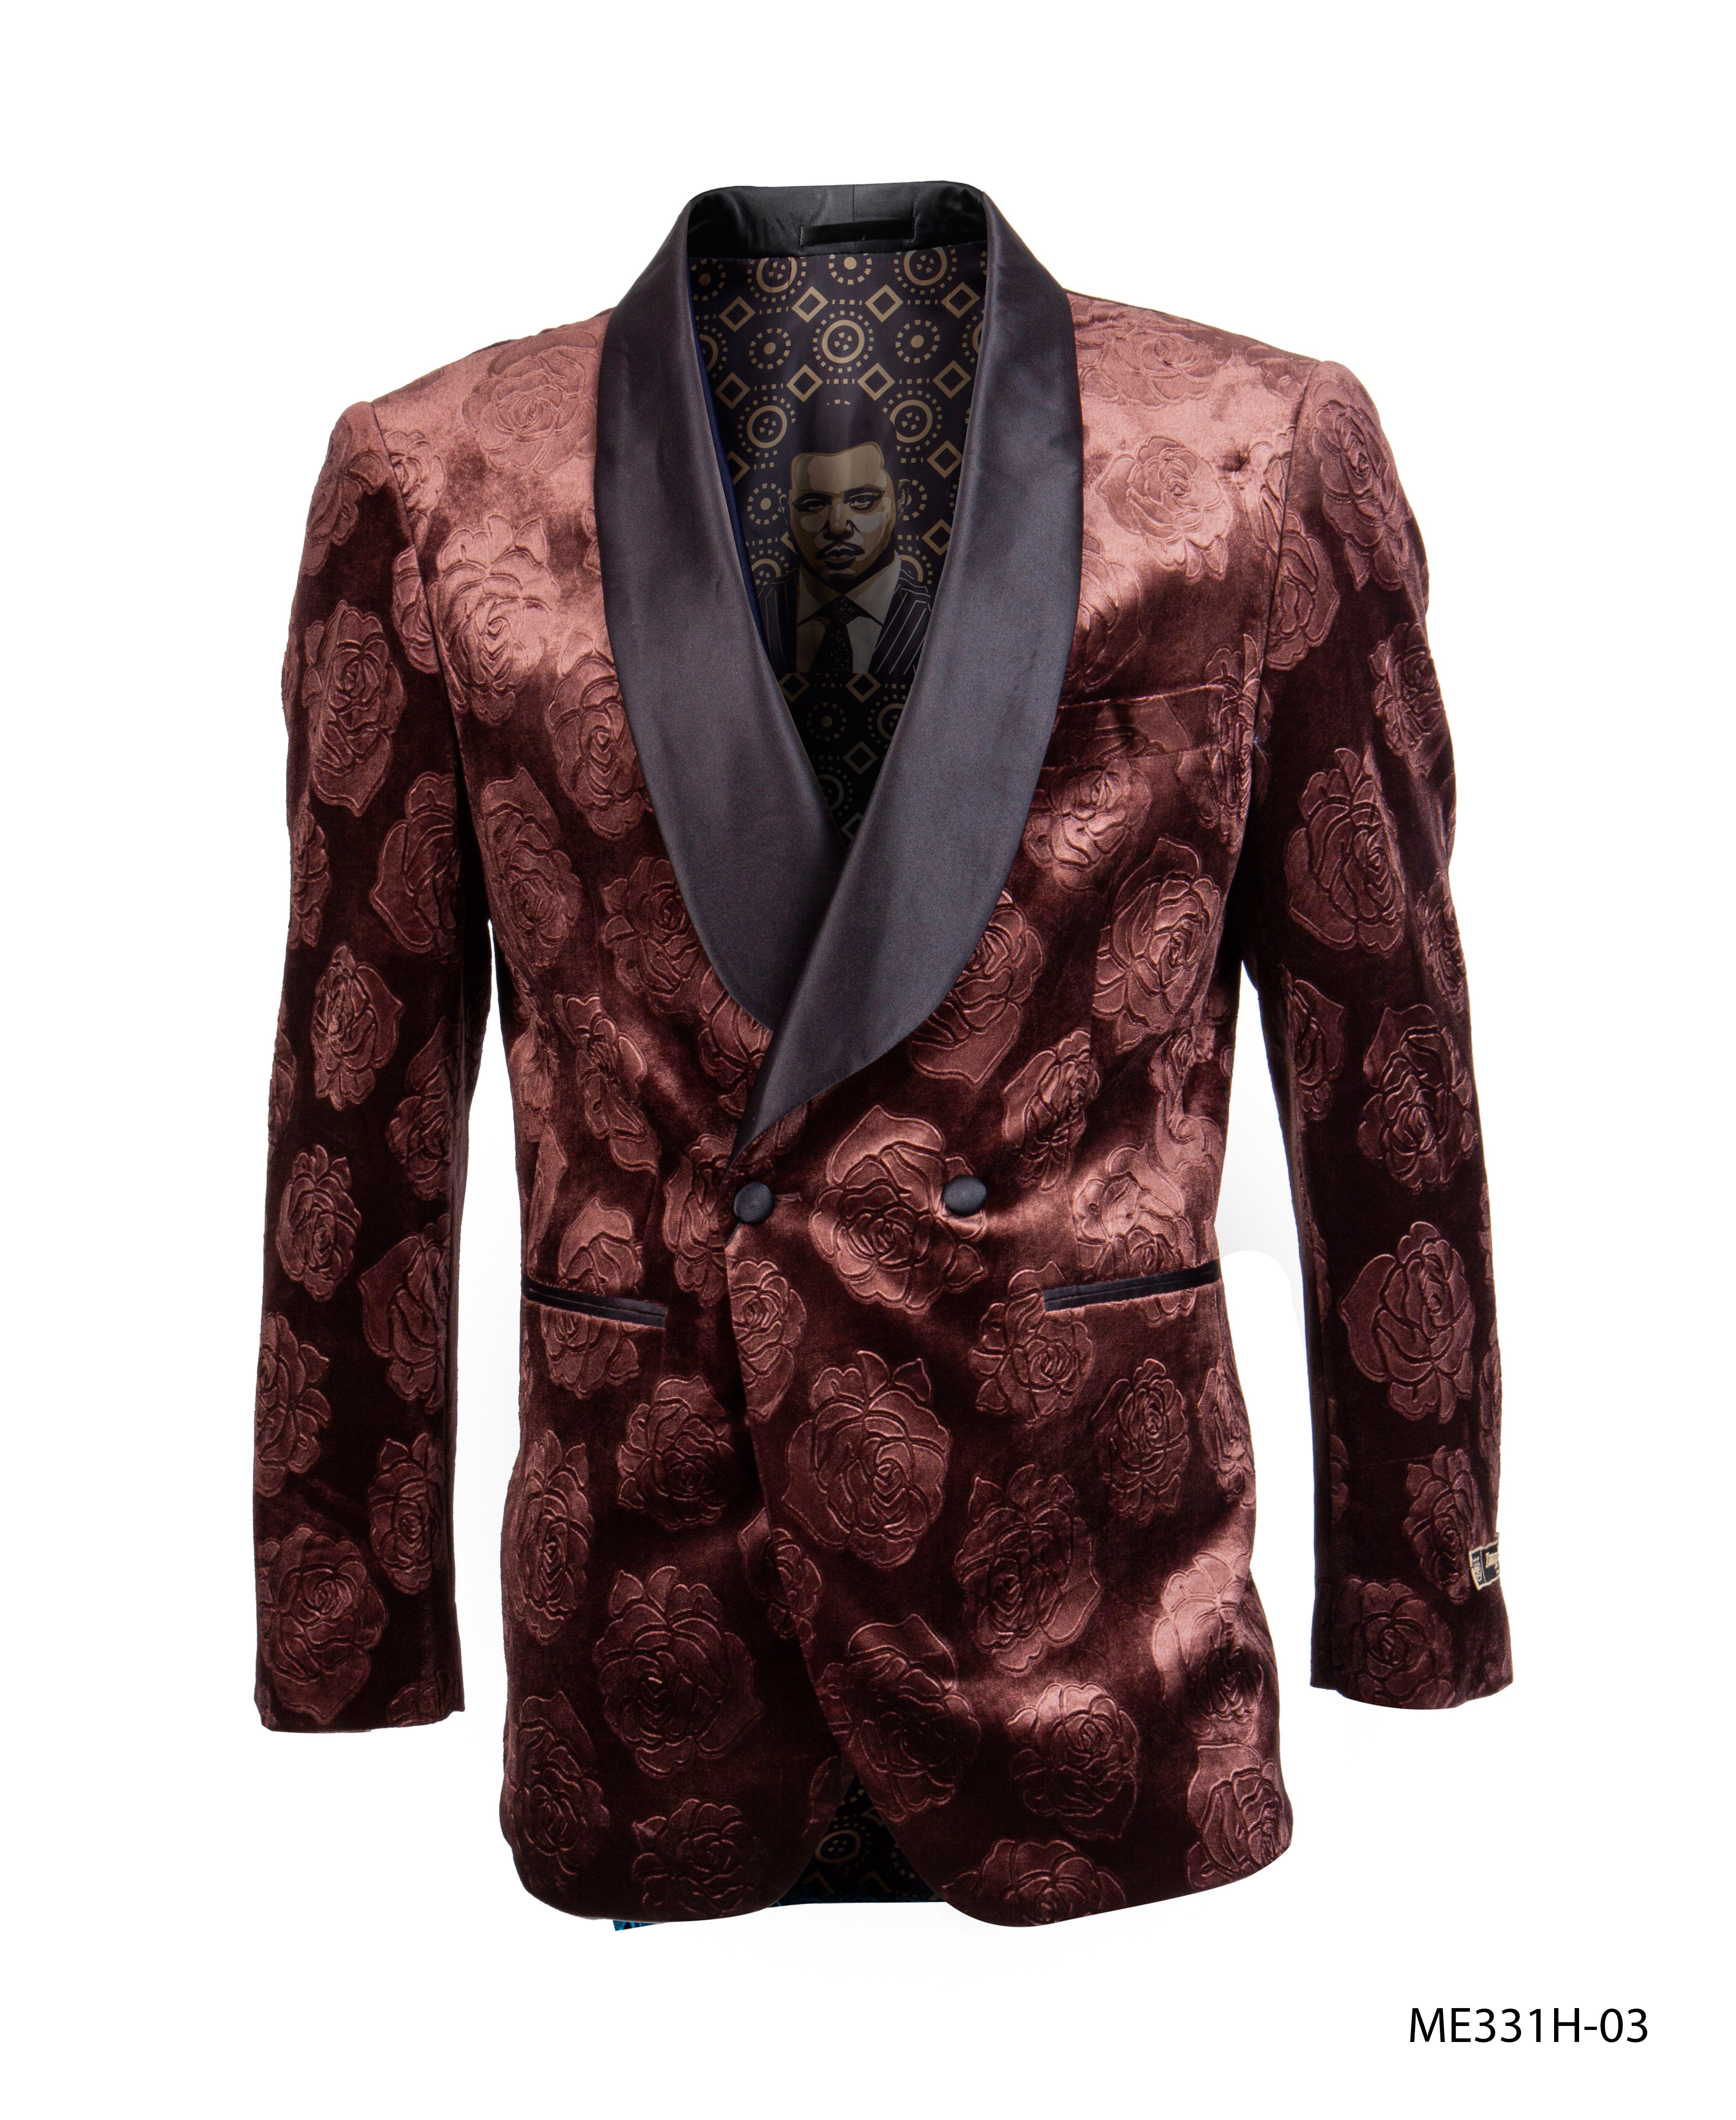 Rust Empire Show Blazers Formal Dinner Suit Jackets For Men ME331H-03